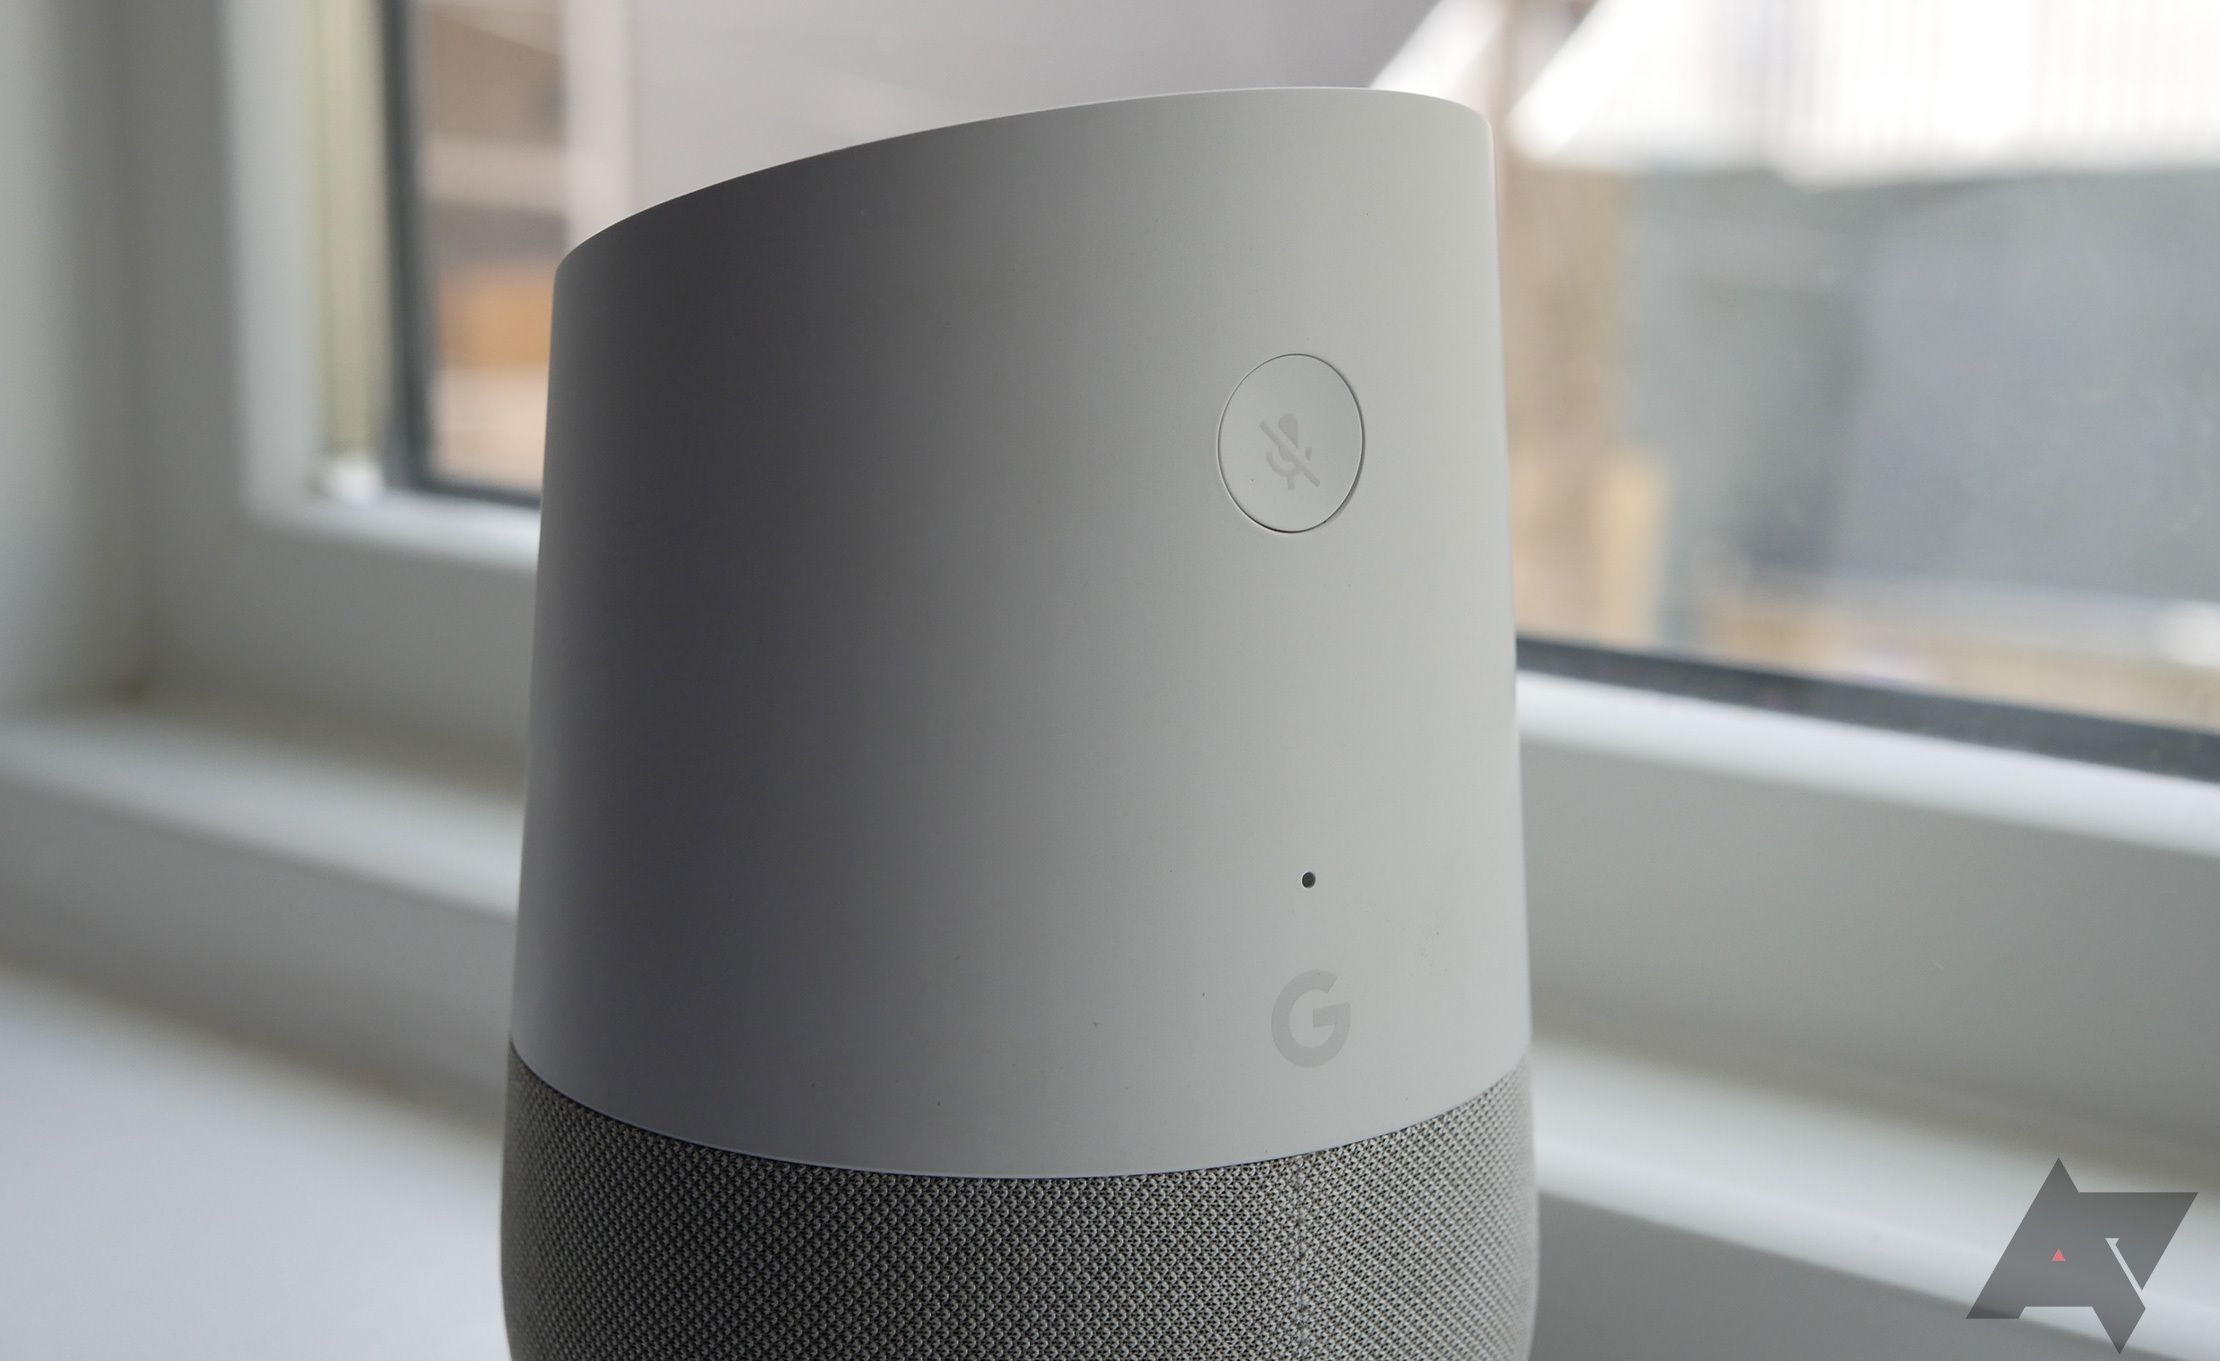 The back of a first generation Google Home speaker showing the microphone off button